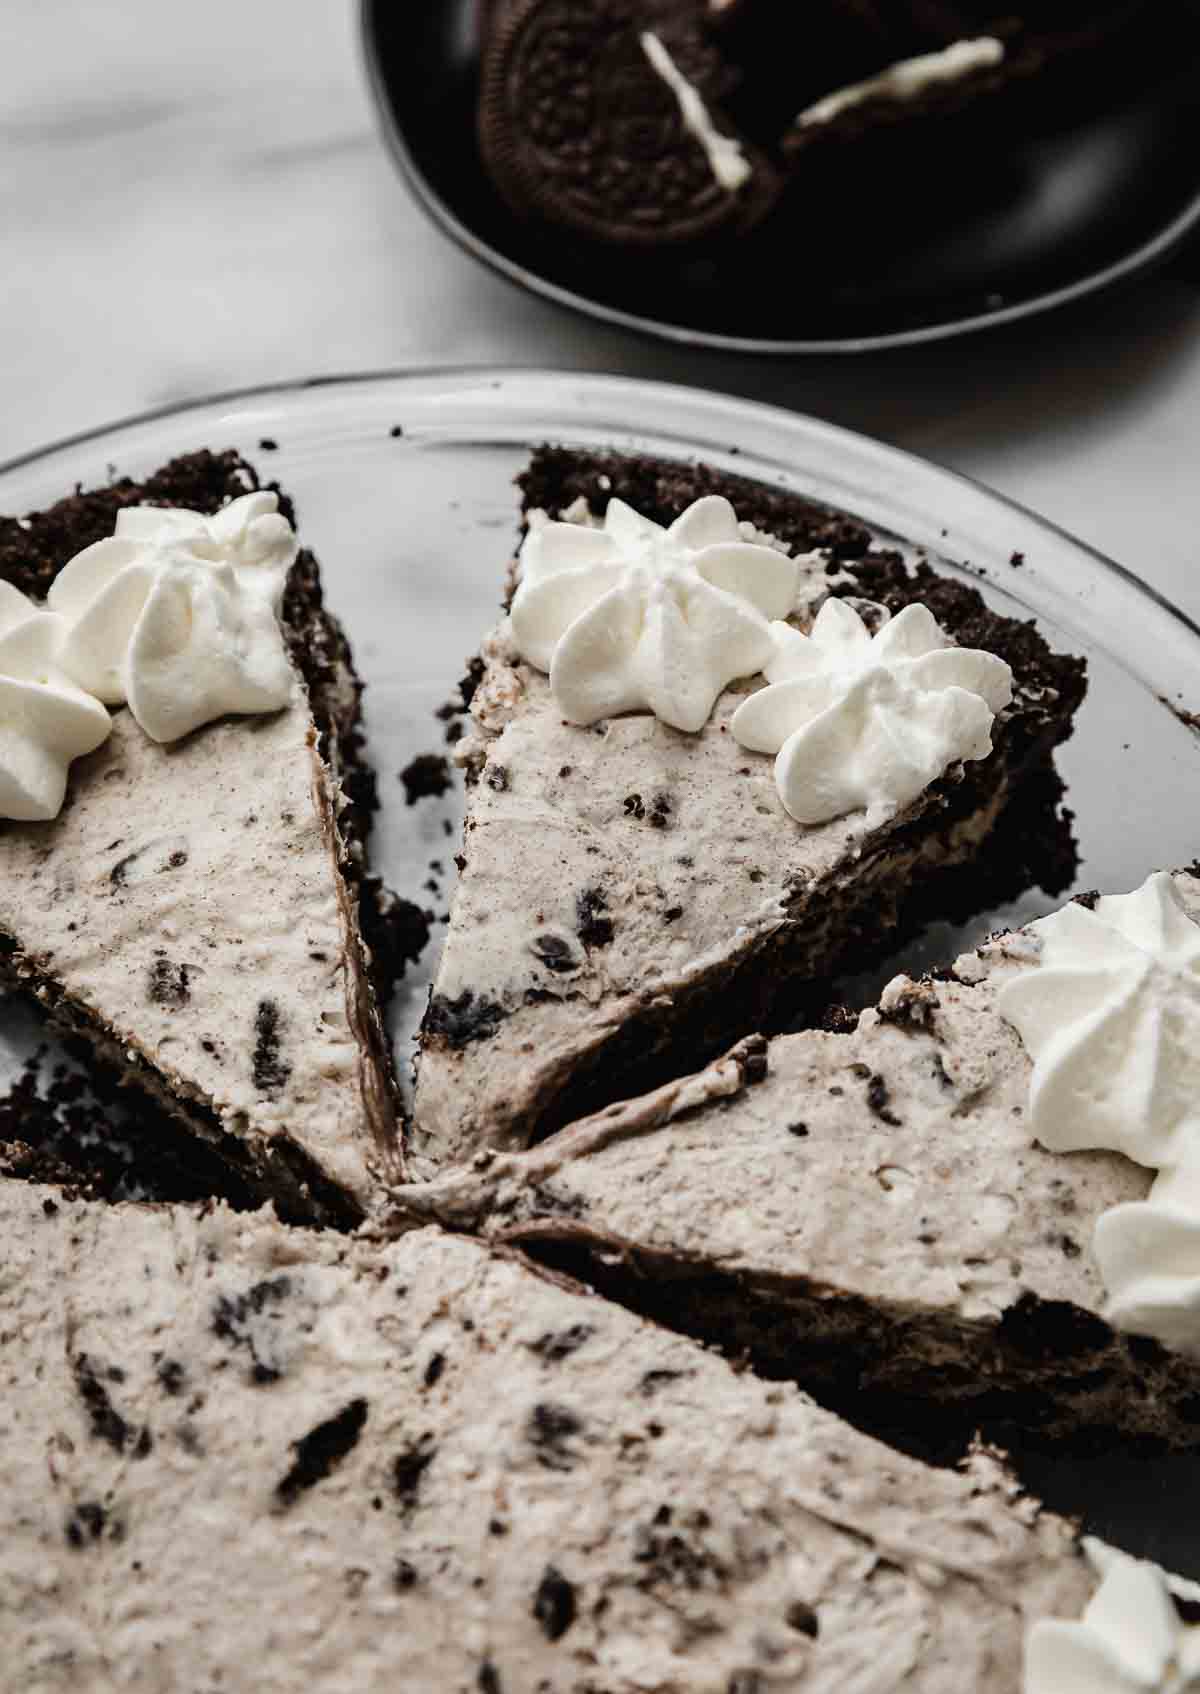 Cookies and Cream Pie cut into triangle slices and topped with whipped cream.